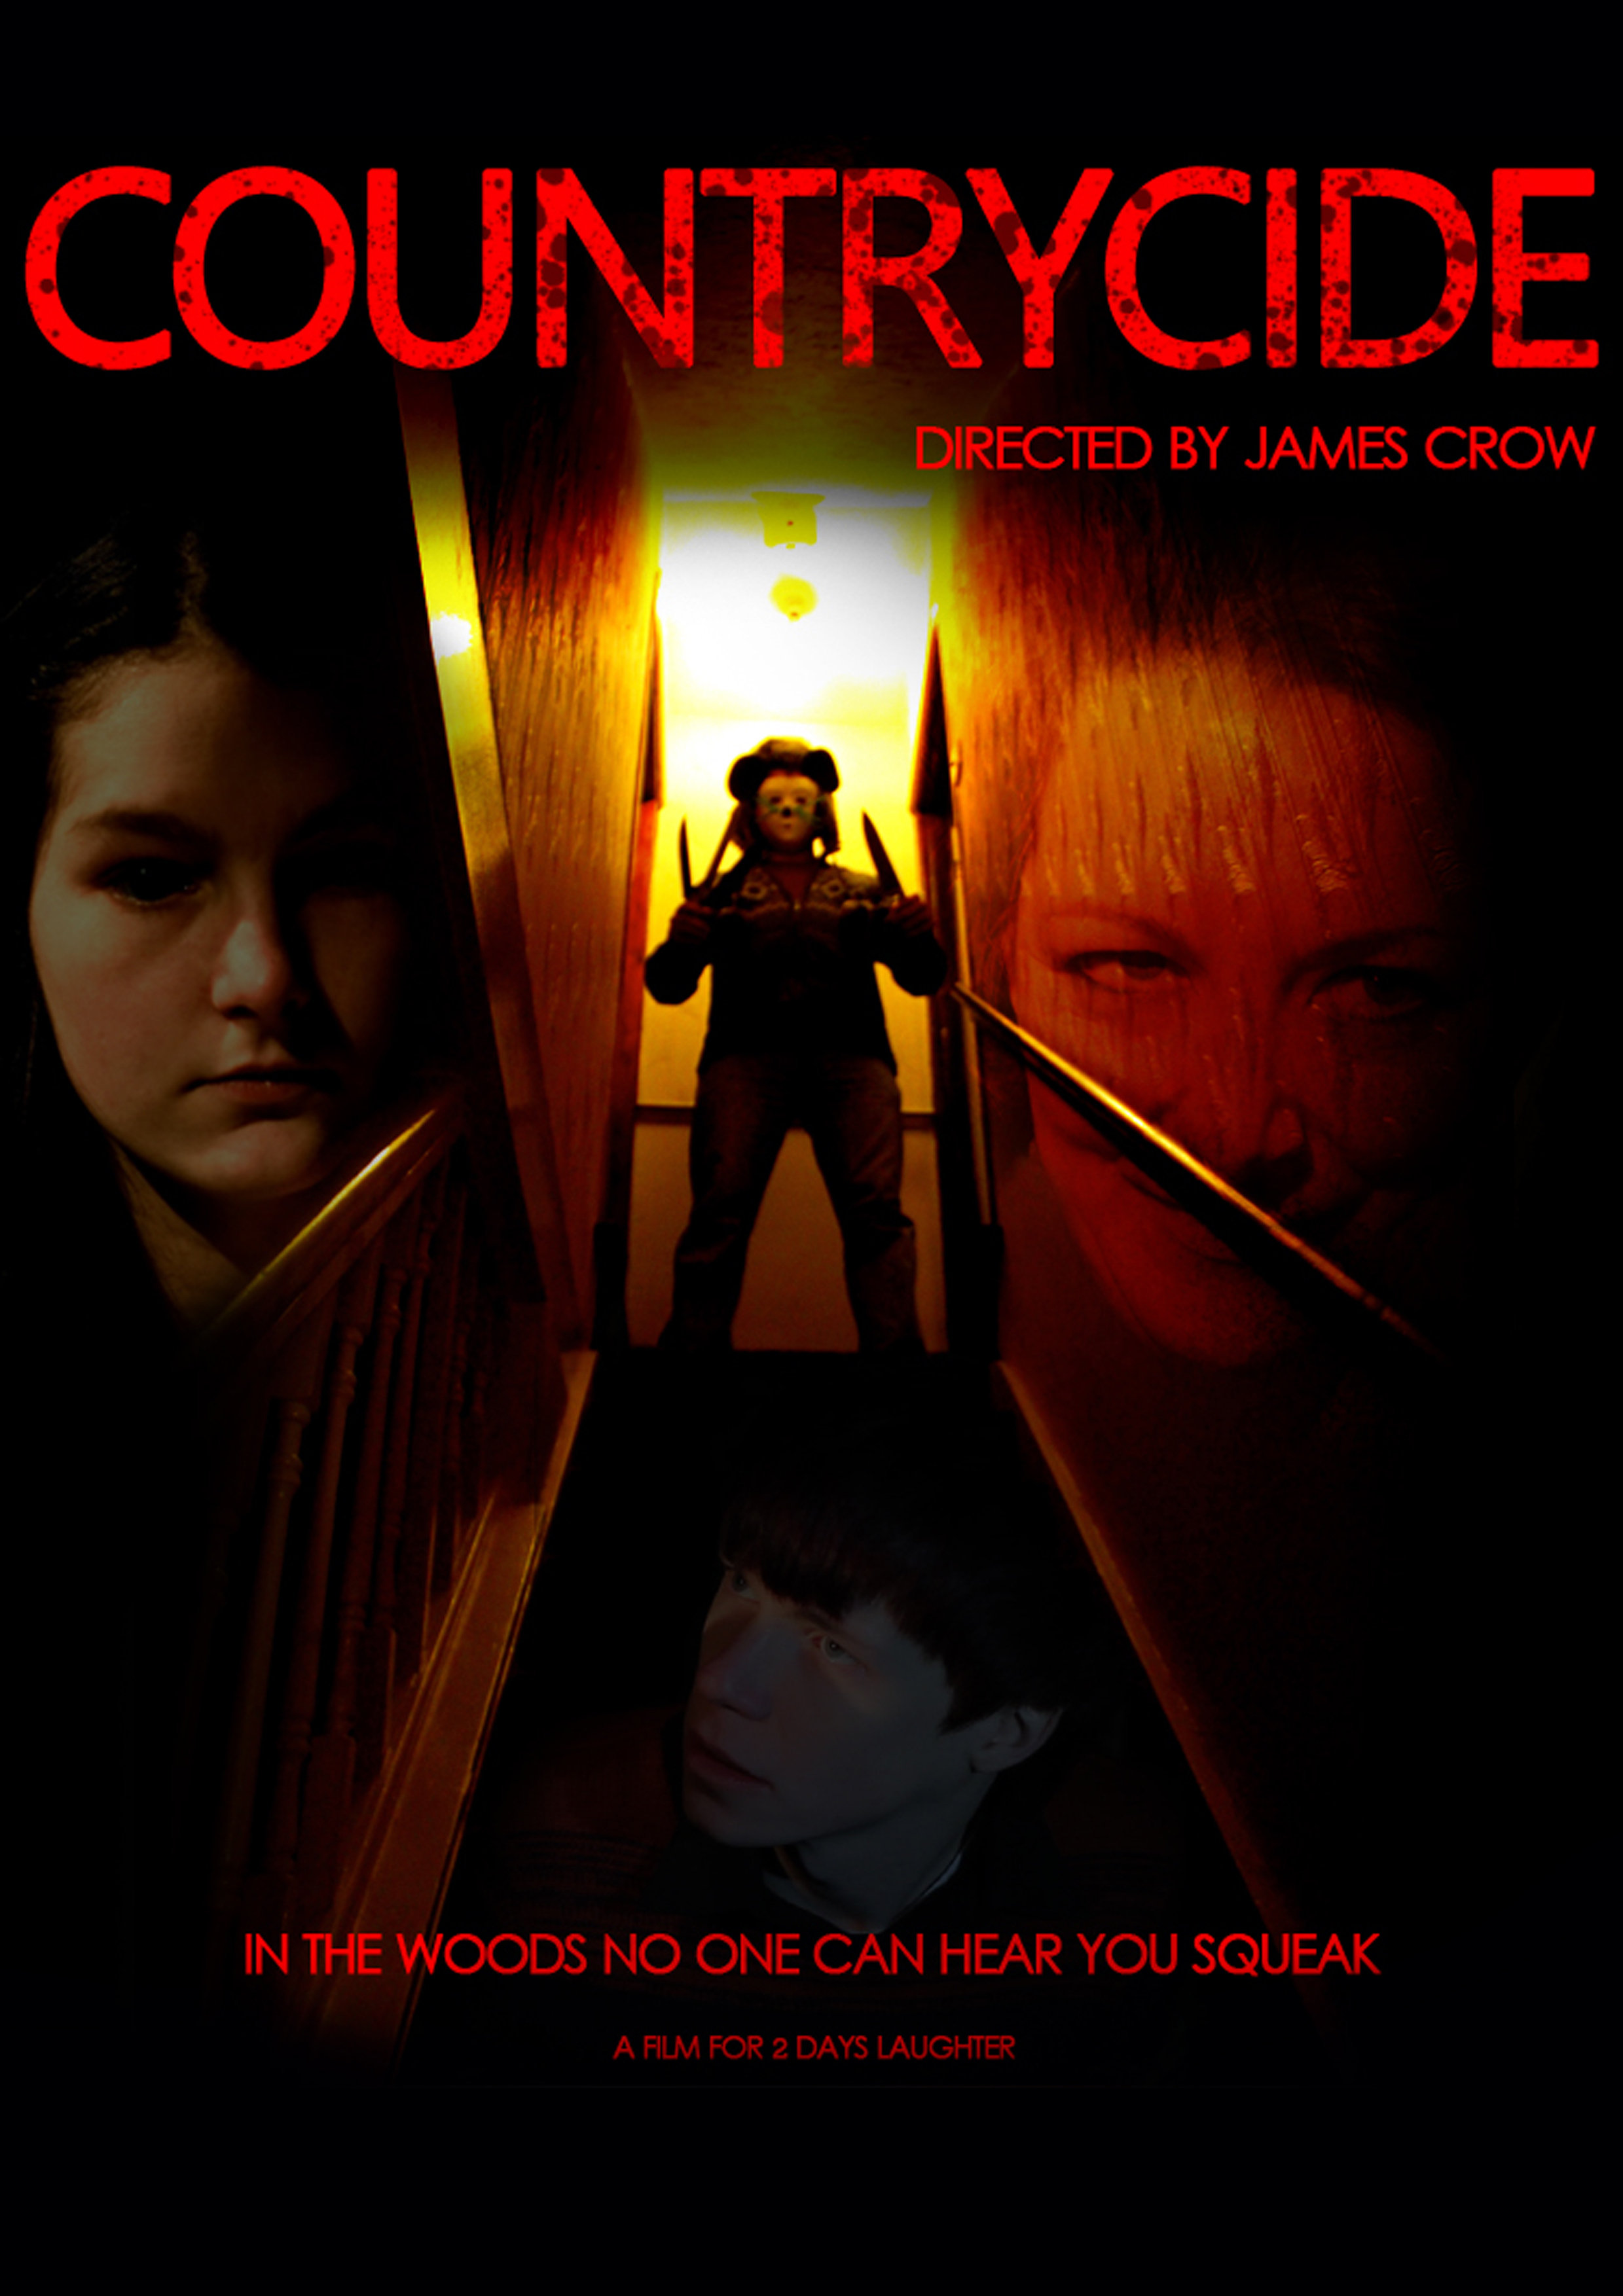 Poster for dark Anti-drink driving black comedy Countrycide